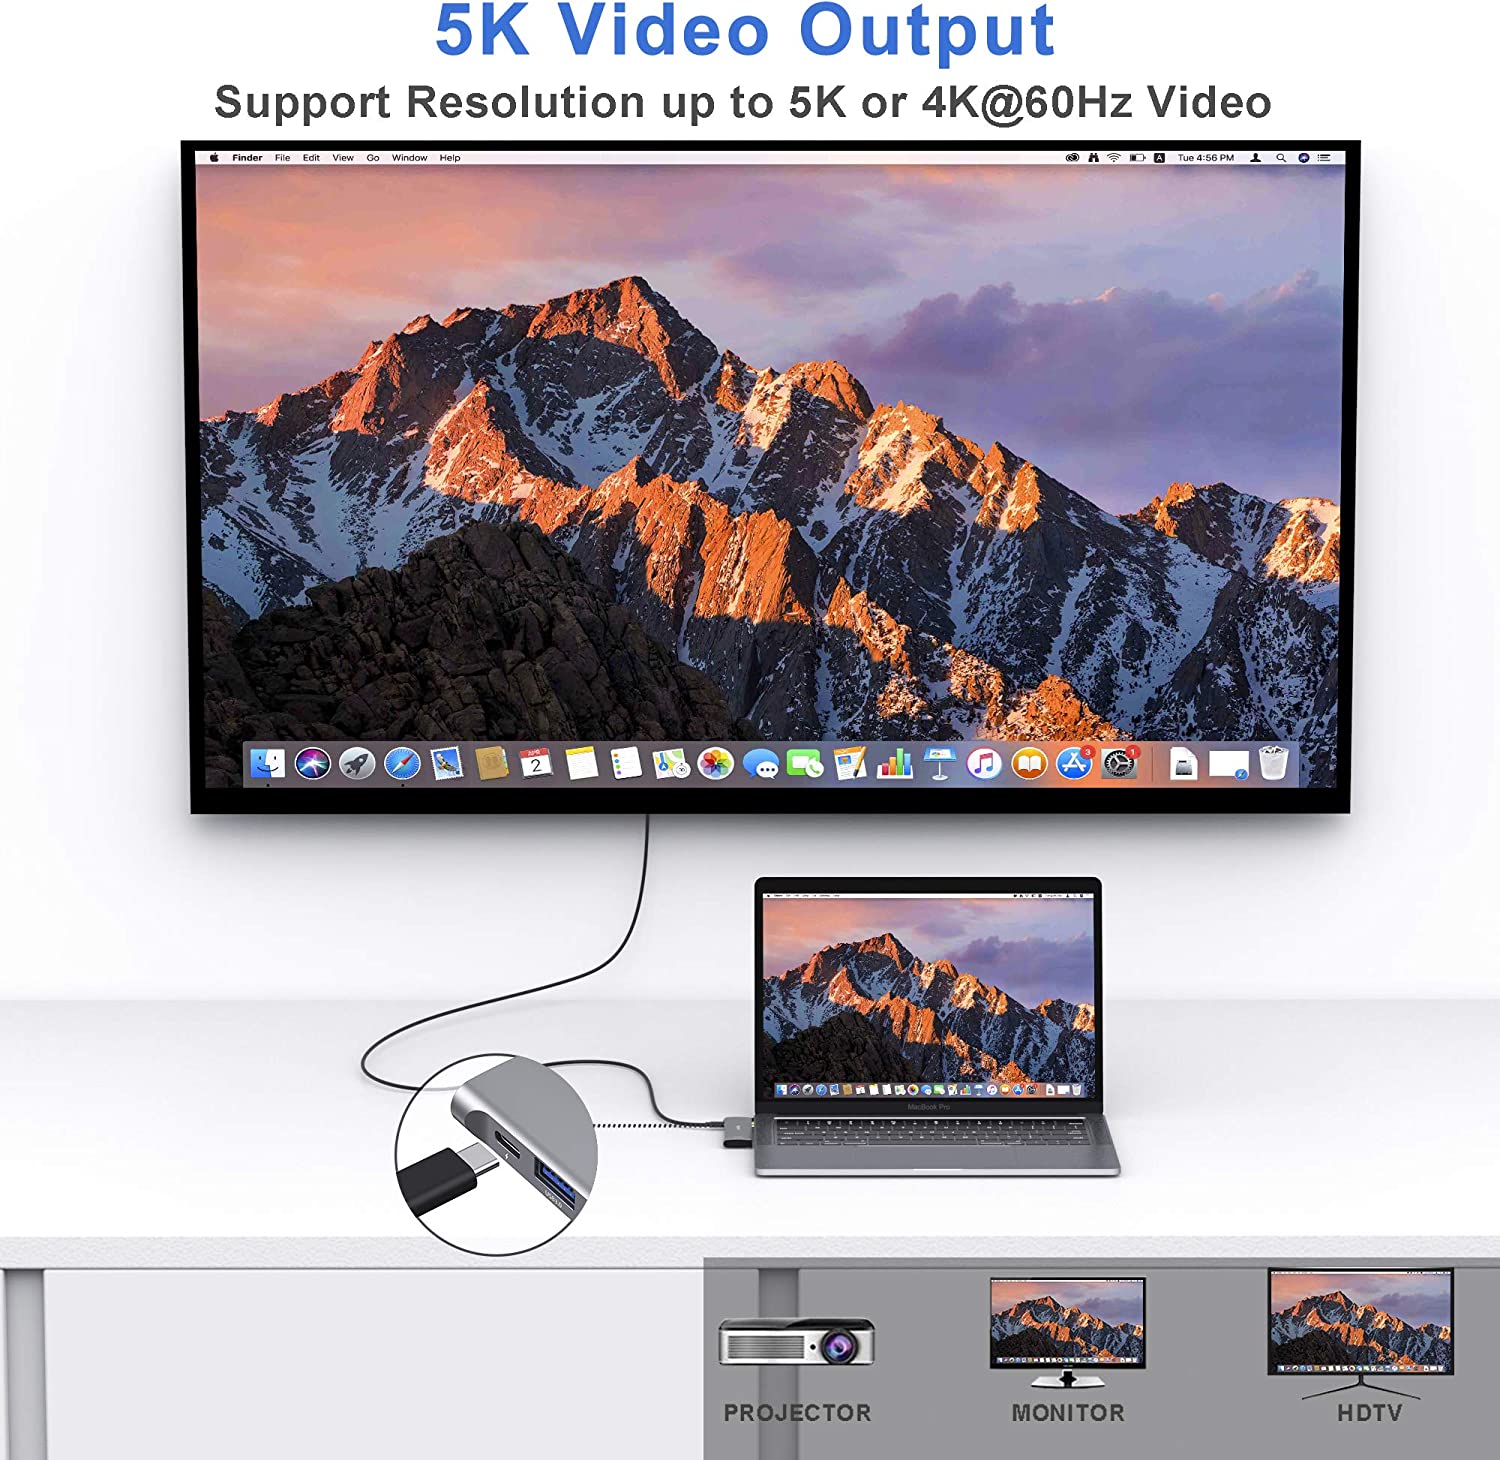 Connect your Macbook Pro or Macbook Air to a monitor, TV or projector